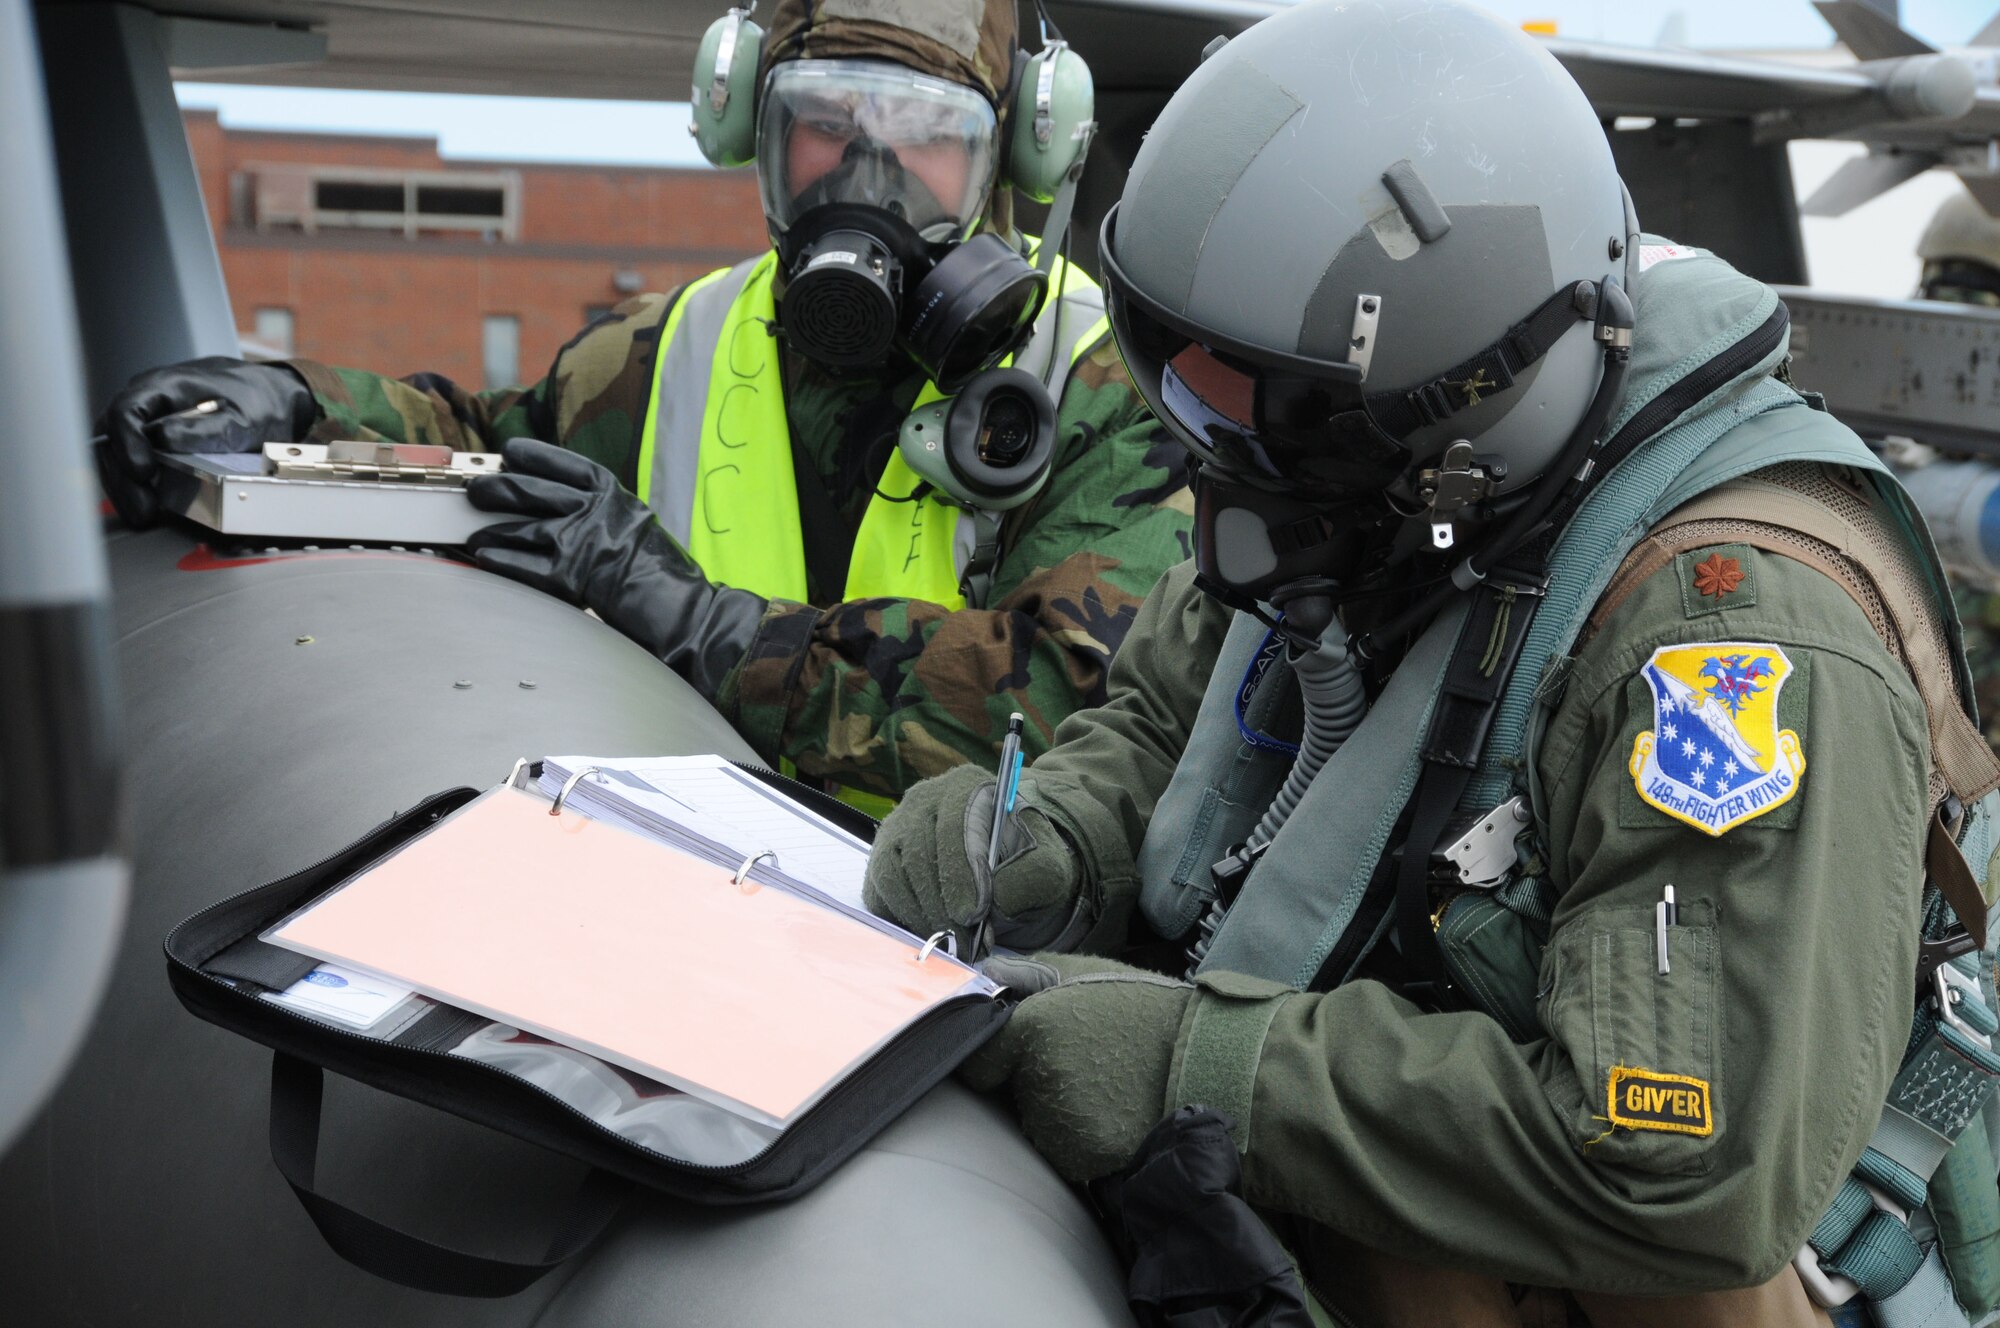 Members of the 148th Fighter Wing participate in an Operational Readiness Exercise June 11, 2011. The exercise was designed to refamiliarize Airmen with Force Protection Conditions, Mission Oriented Protection Postures and for members to perform the mission while wearing the Chemical Protective Overgarment. (U.S. Air Force photo by Senior Airman Sarah Hayes.)